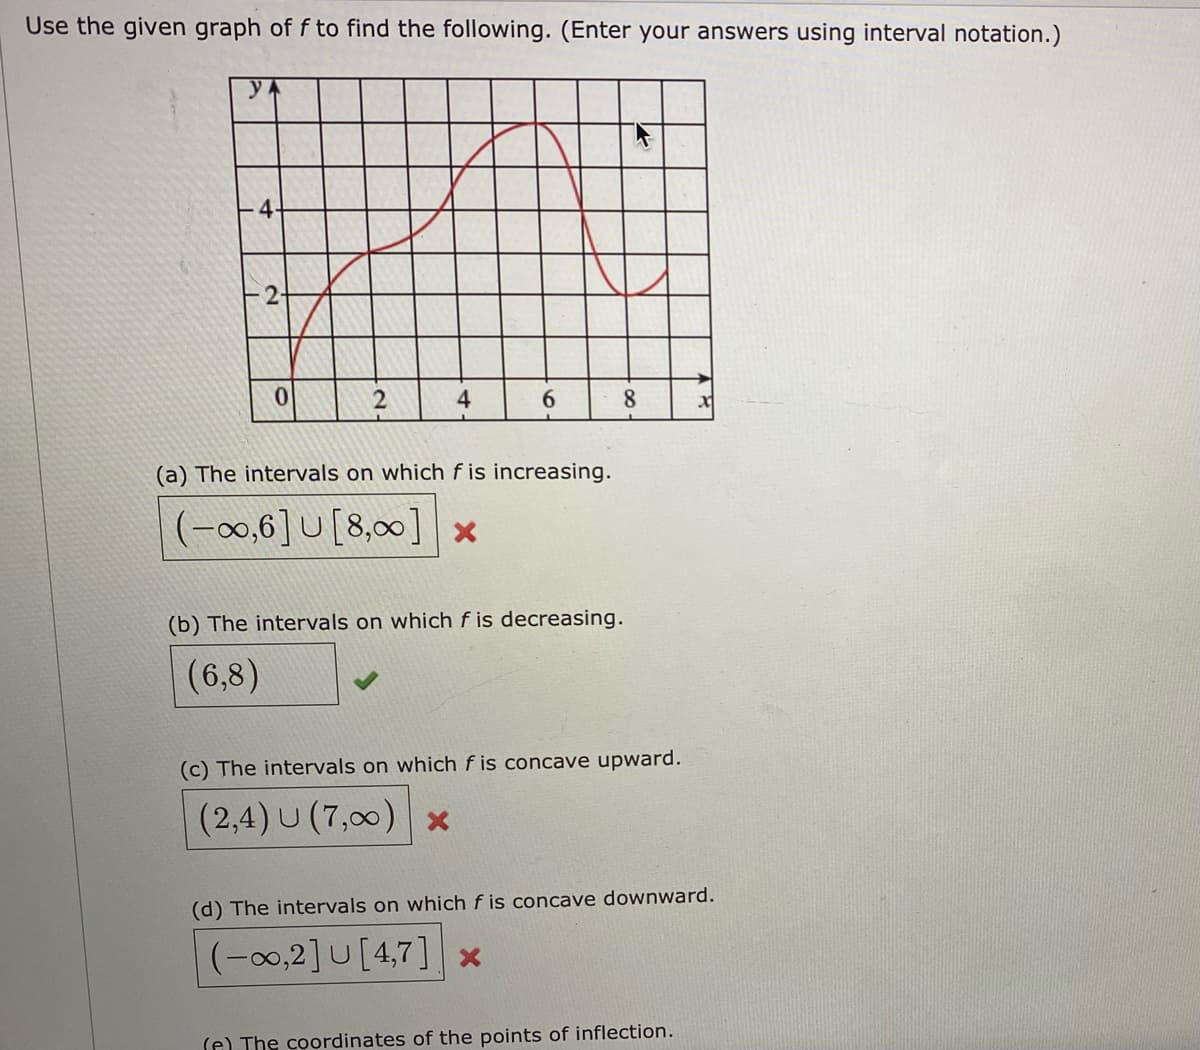 Use the given graph of f to find the following. (Enter your answers using interval notation.)
4-
4
6.
8.
(a) The intervals on which f is increasing.
(-∞0,6] U [8,00]| x
(b) The intervals on which f is decreasing.
(6,8)
(c) The intervals on which f is concave upward.
(2,4) U (7,00) x
(d) The intervals on which f is concave downward.
(-00,2]U[4,7] x
(e) The coordinates of the points of inflection.
